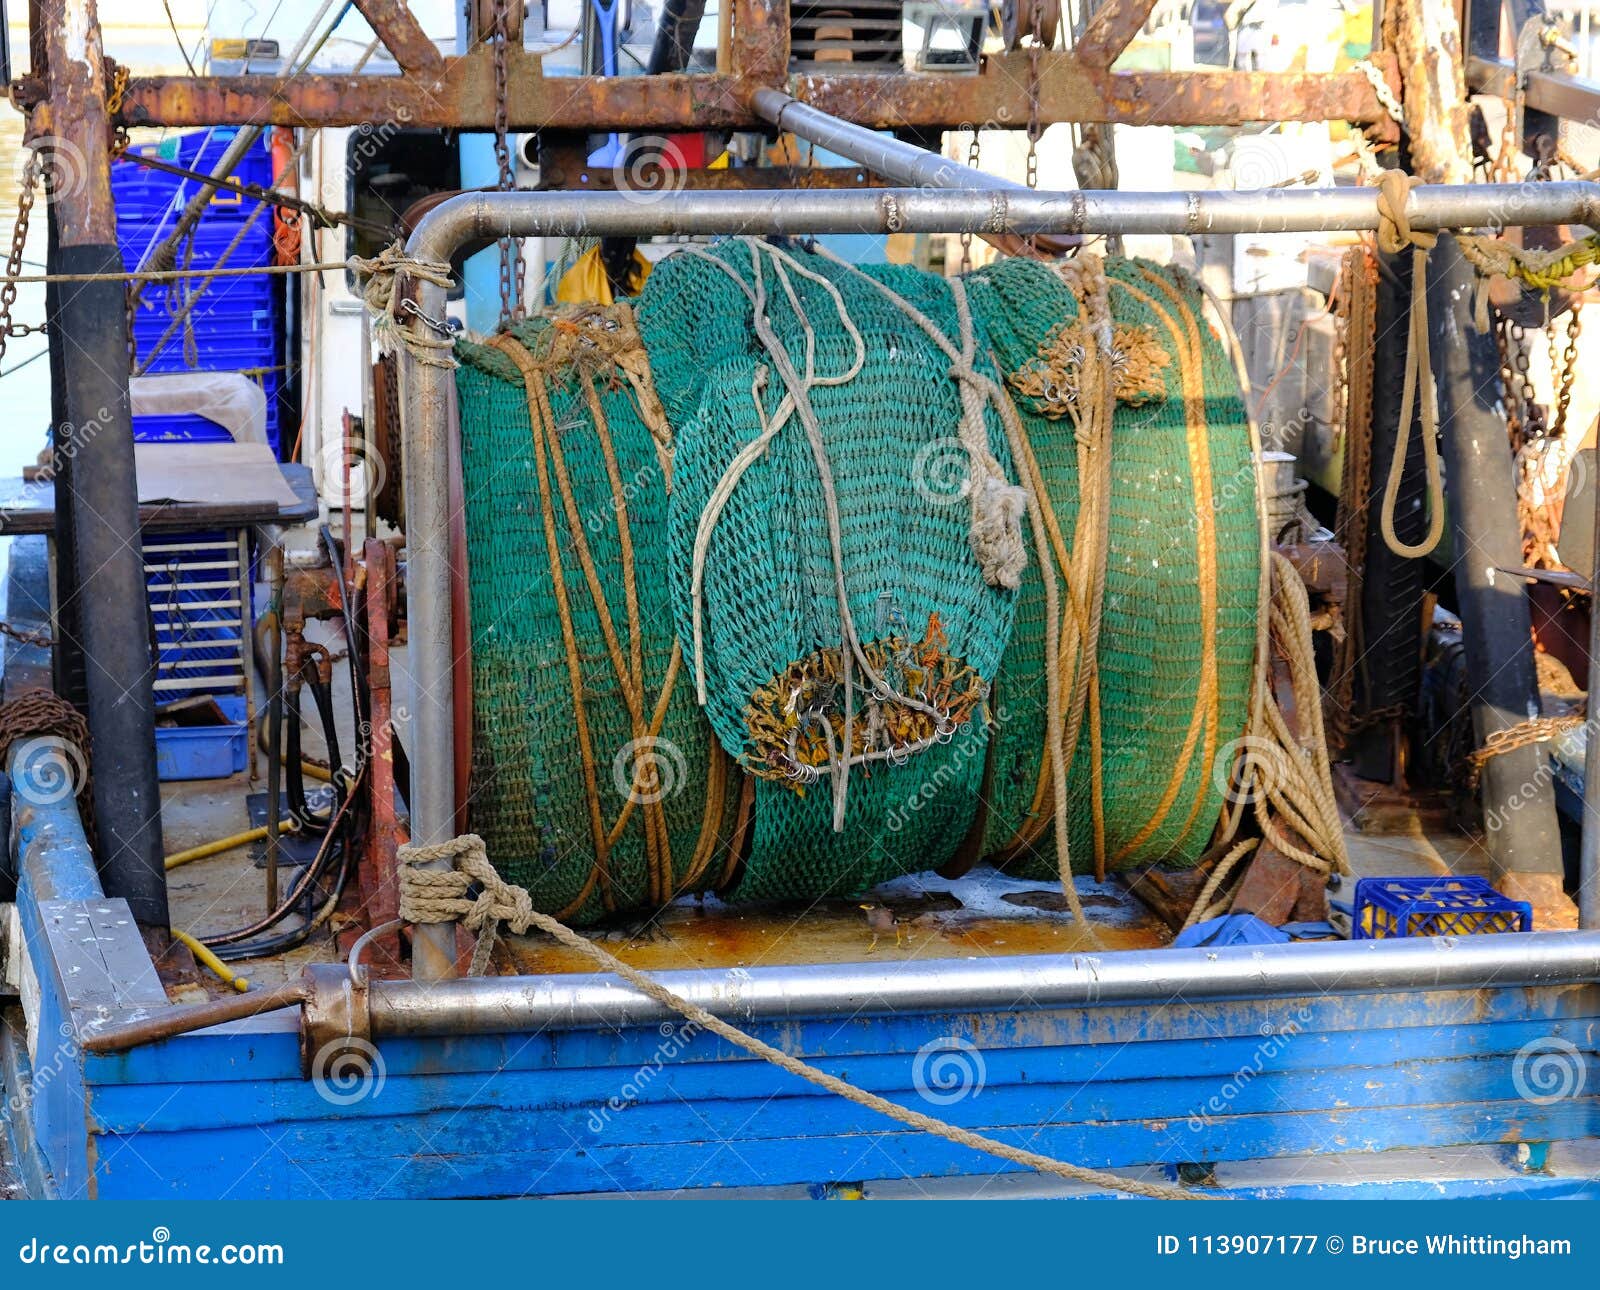 Rolled Up Green Fishing Net on Deep Sea Trawler Stock Image - Image of  sydney, rolled: 113907177